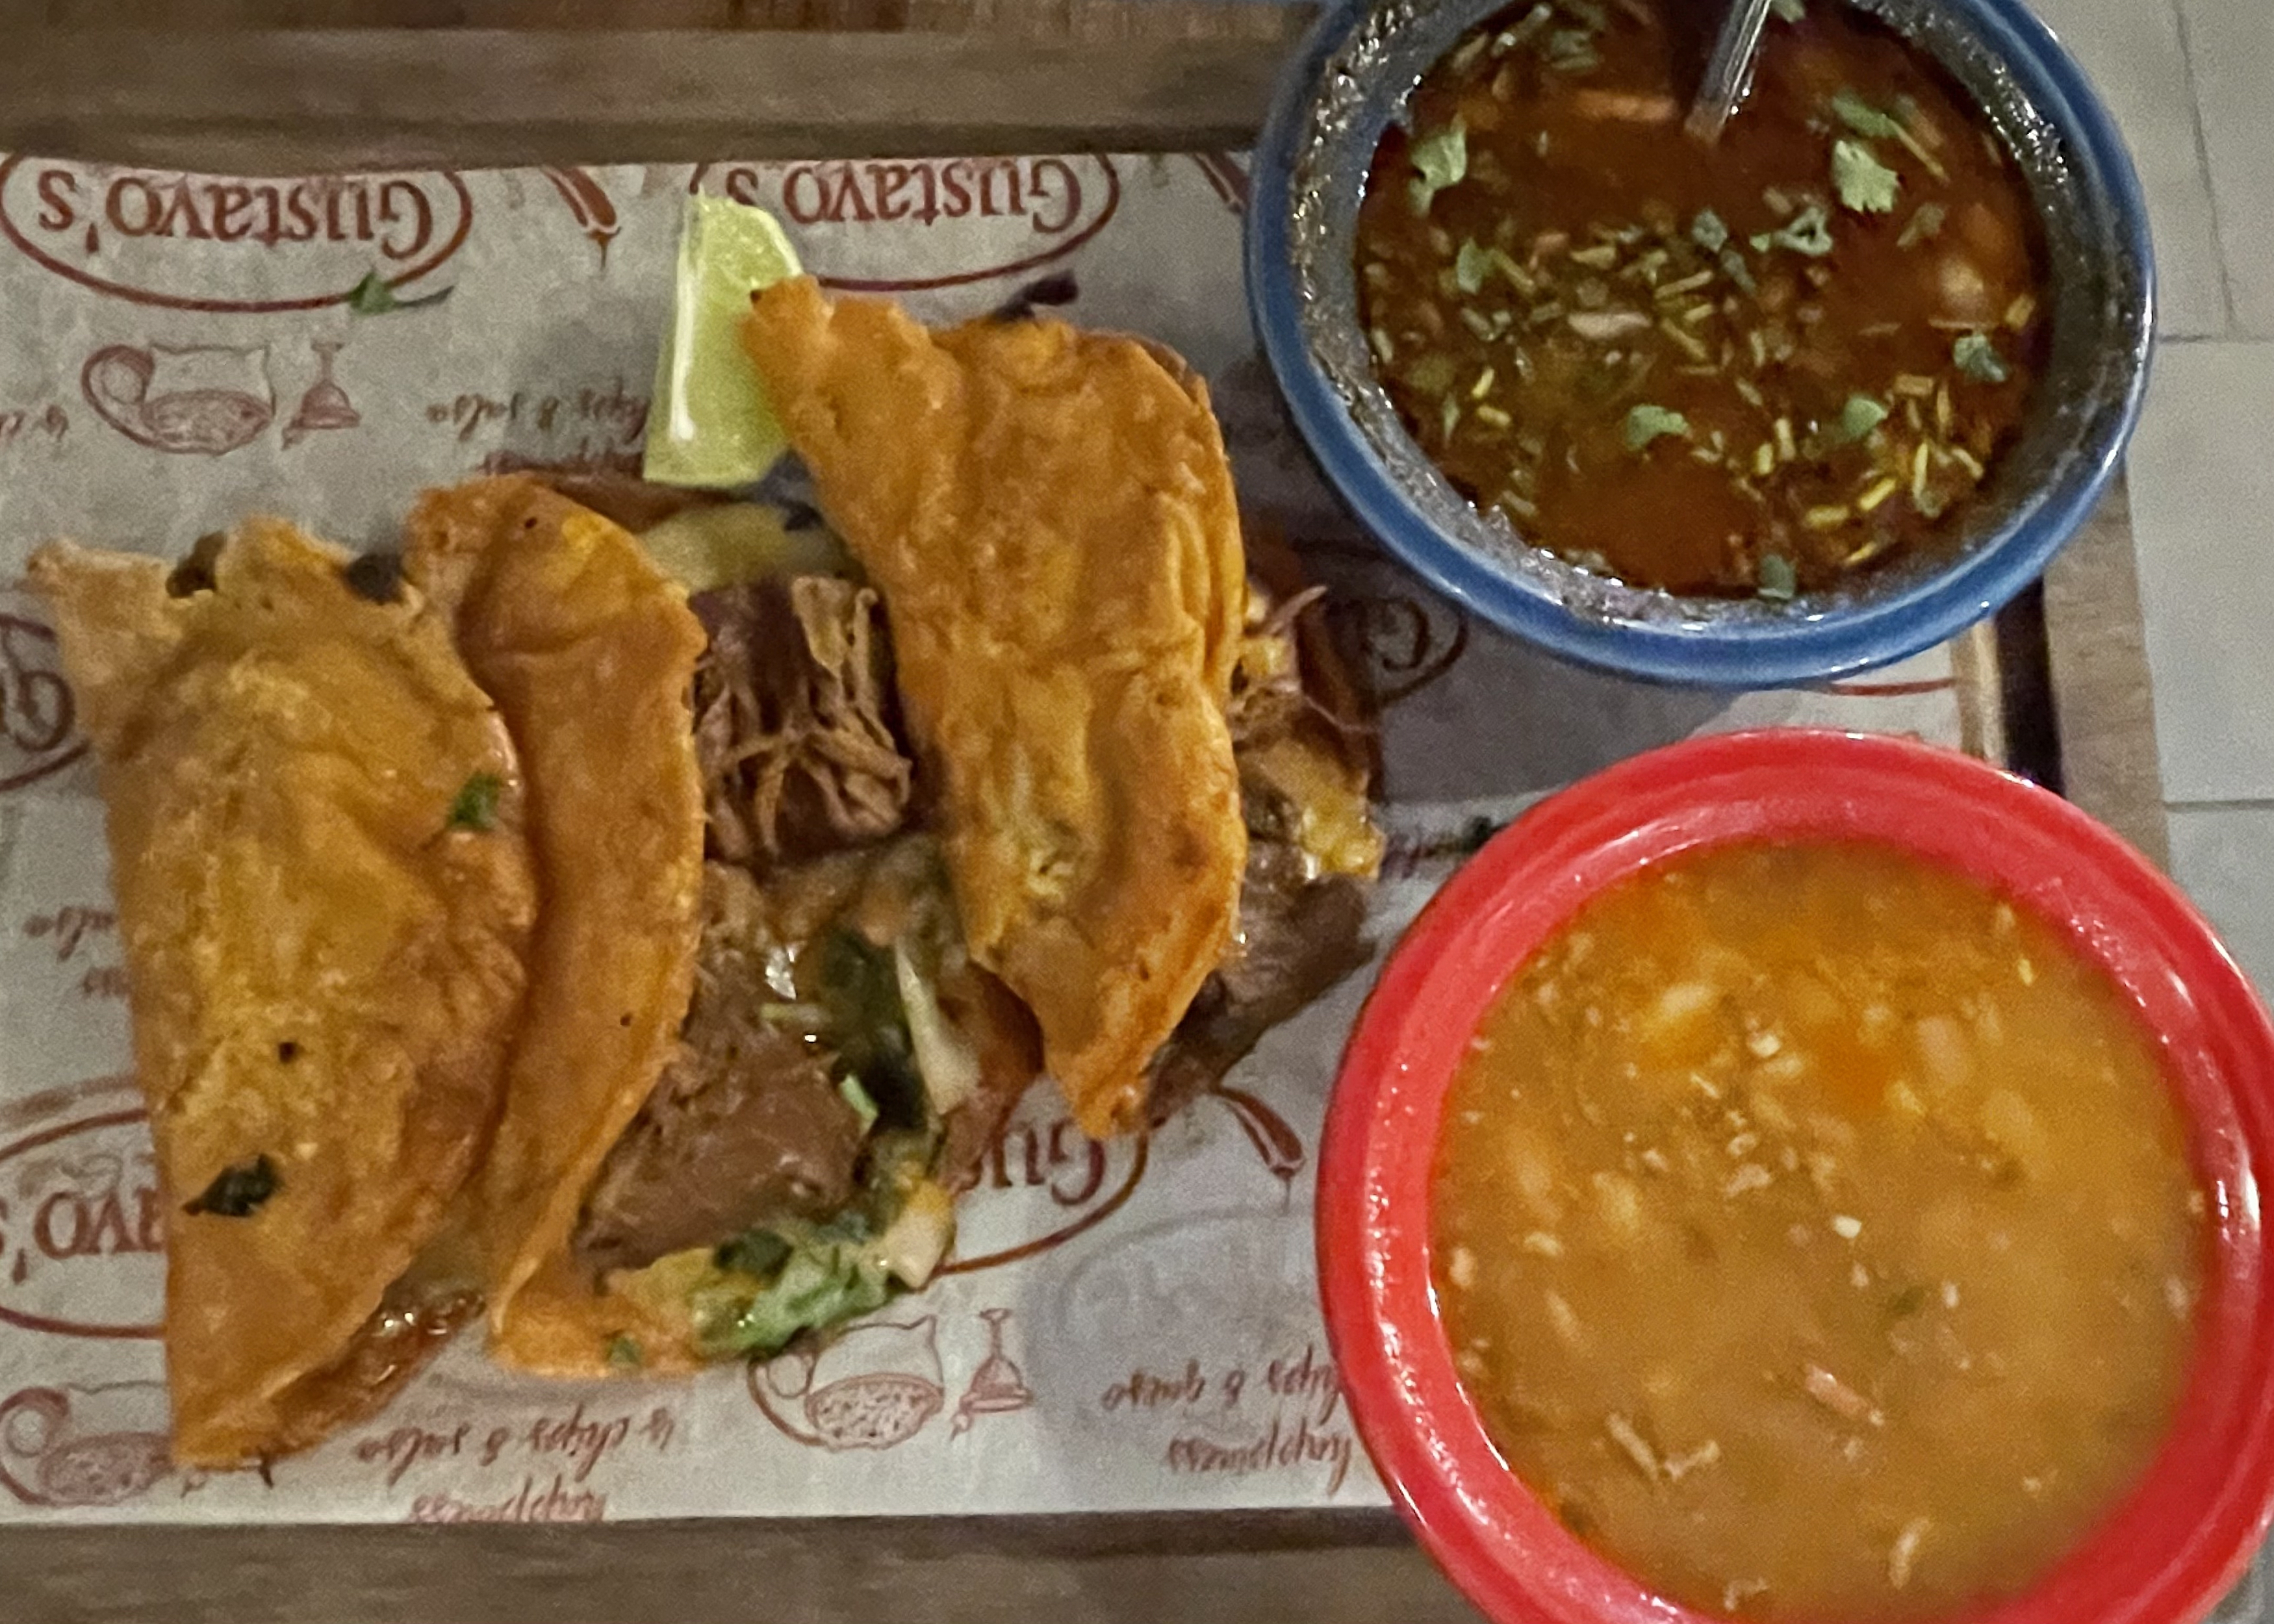 Birria is like a turbo-powered taco. Gustavo's tasty version is made with long-marinated and simmered Angus beef, chiles, and spices packed into marinated crisp corn tortillas to maximize its flavor.